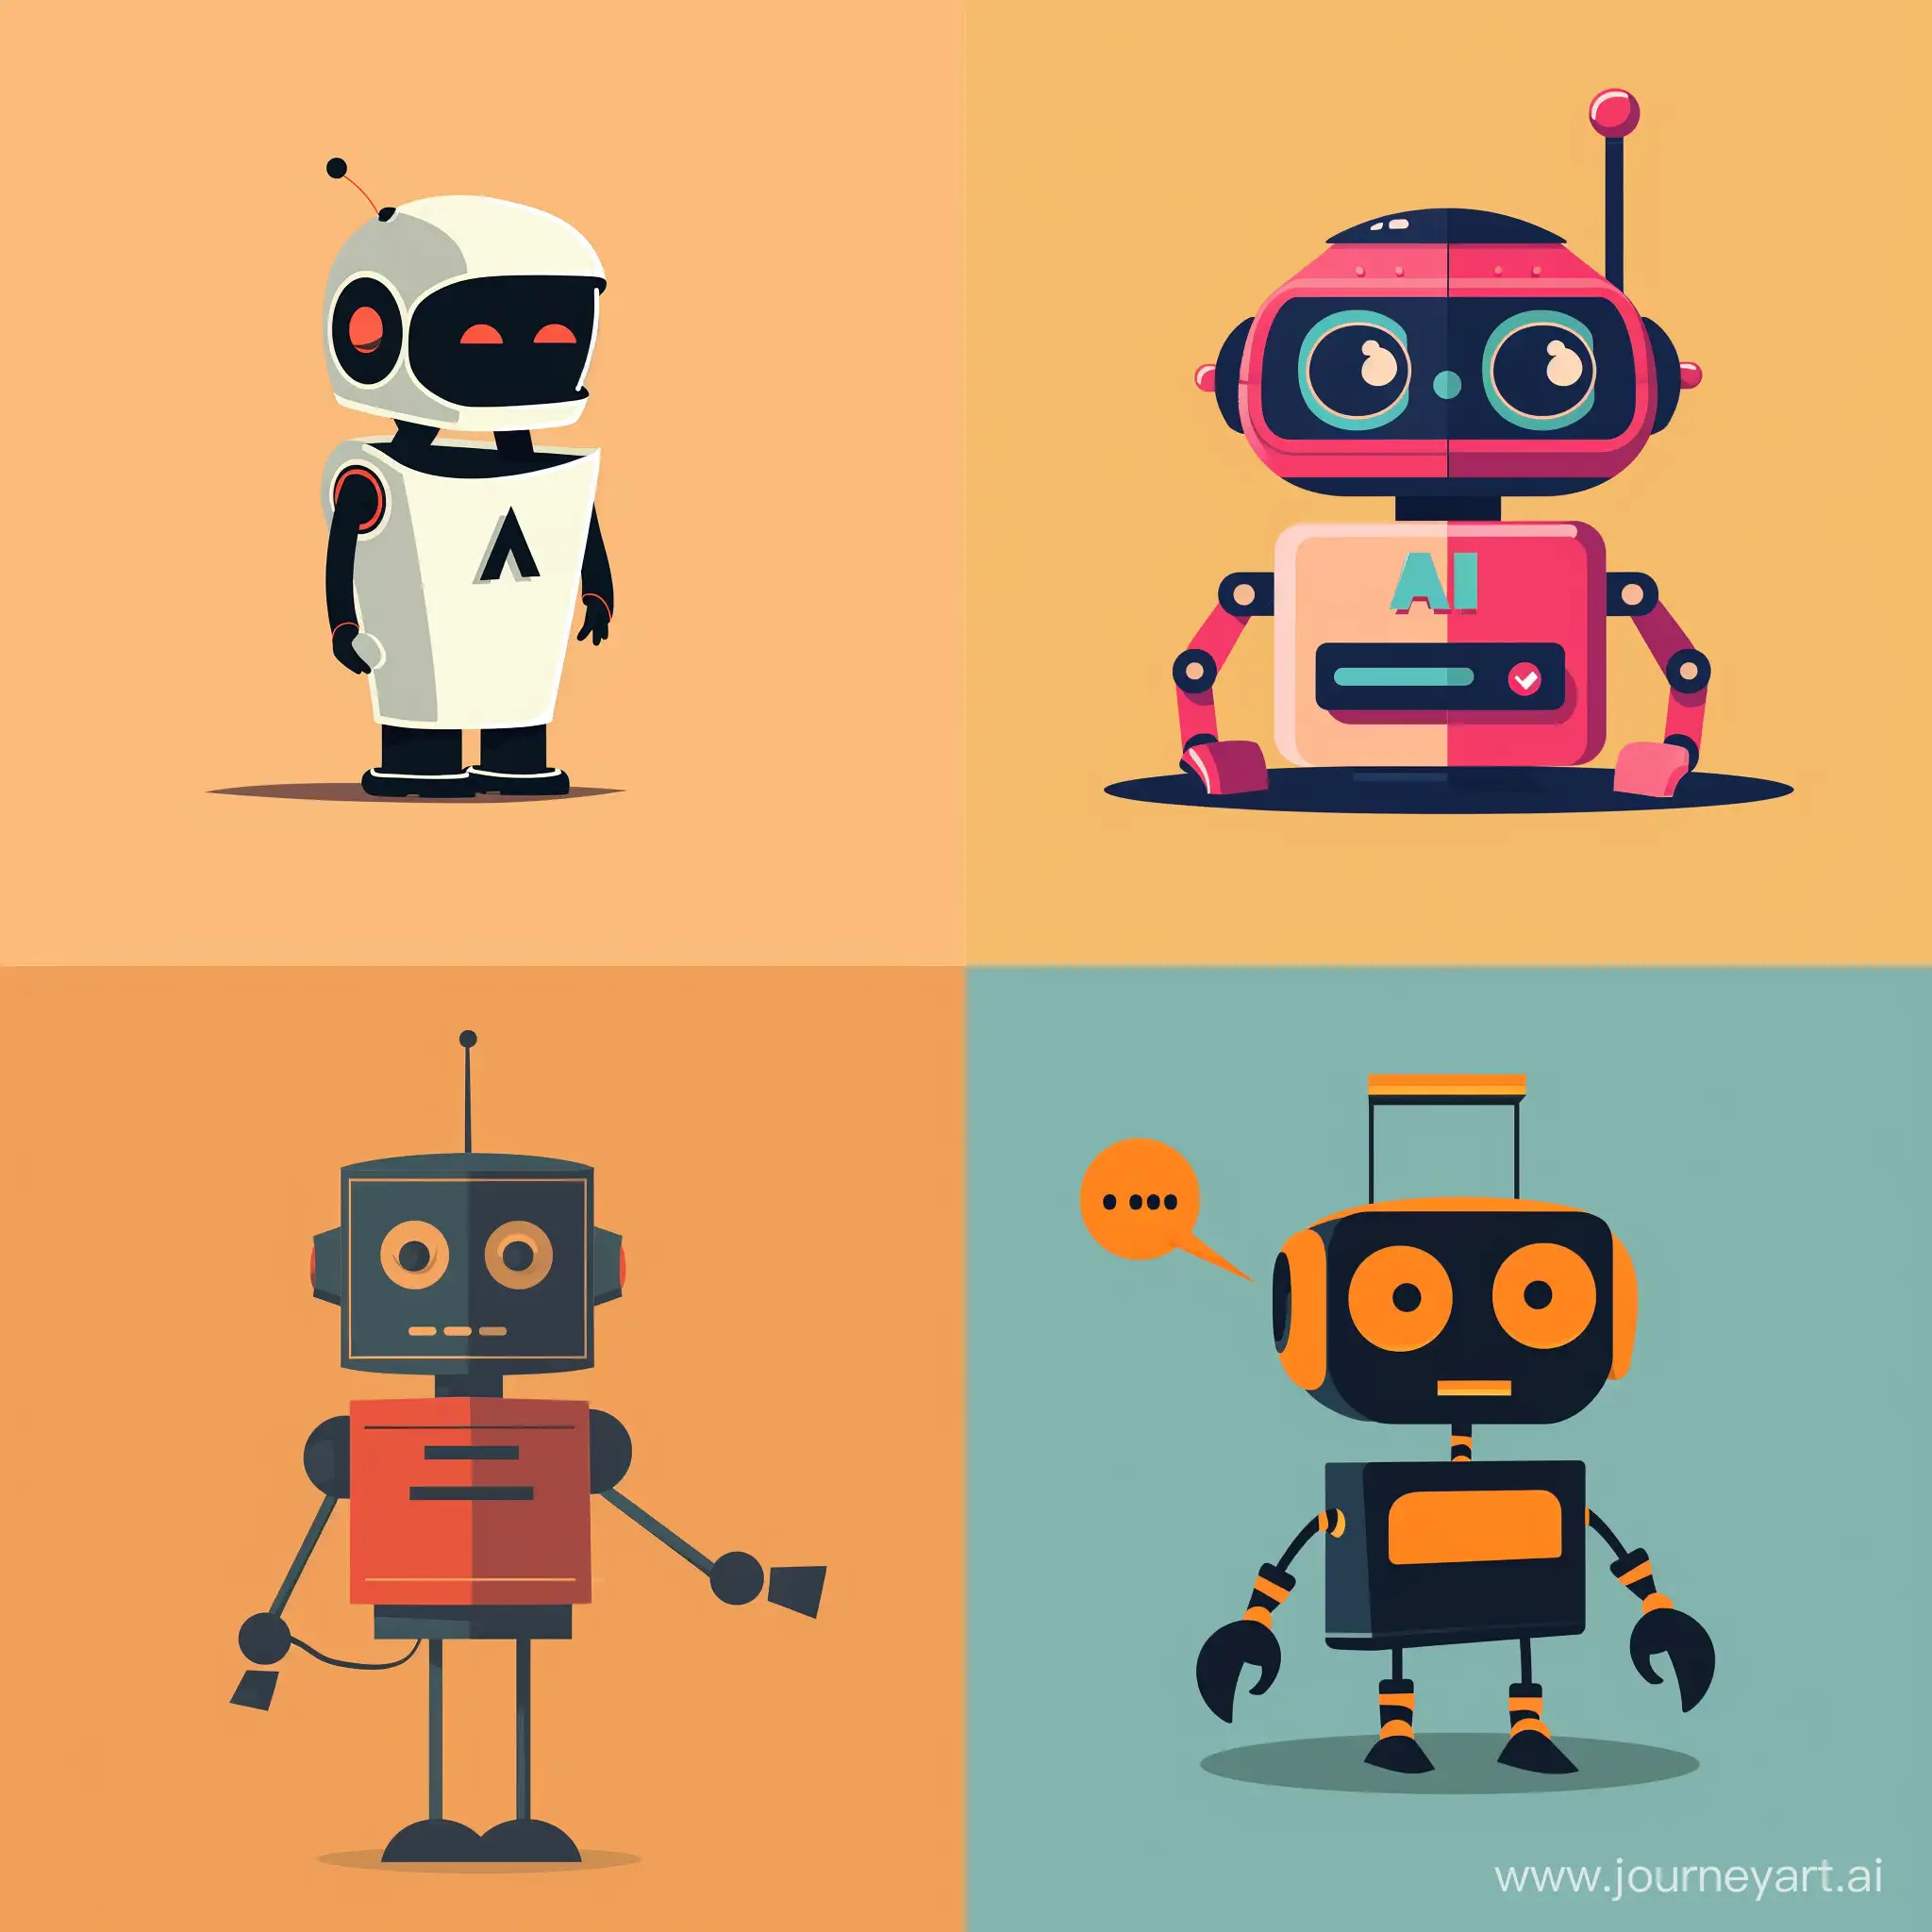 illustration a minimal graphic image about "AI Chatbot" with a plain color background